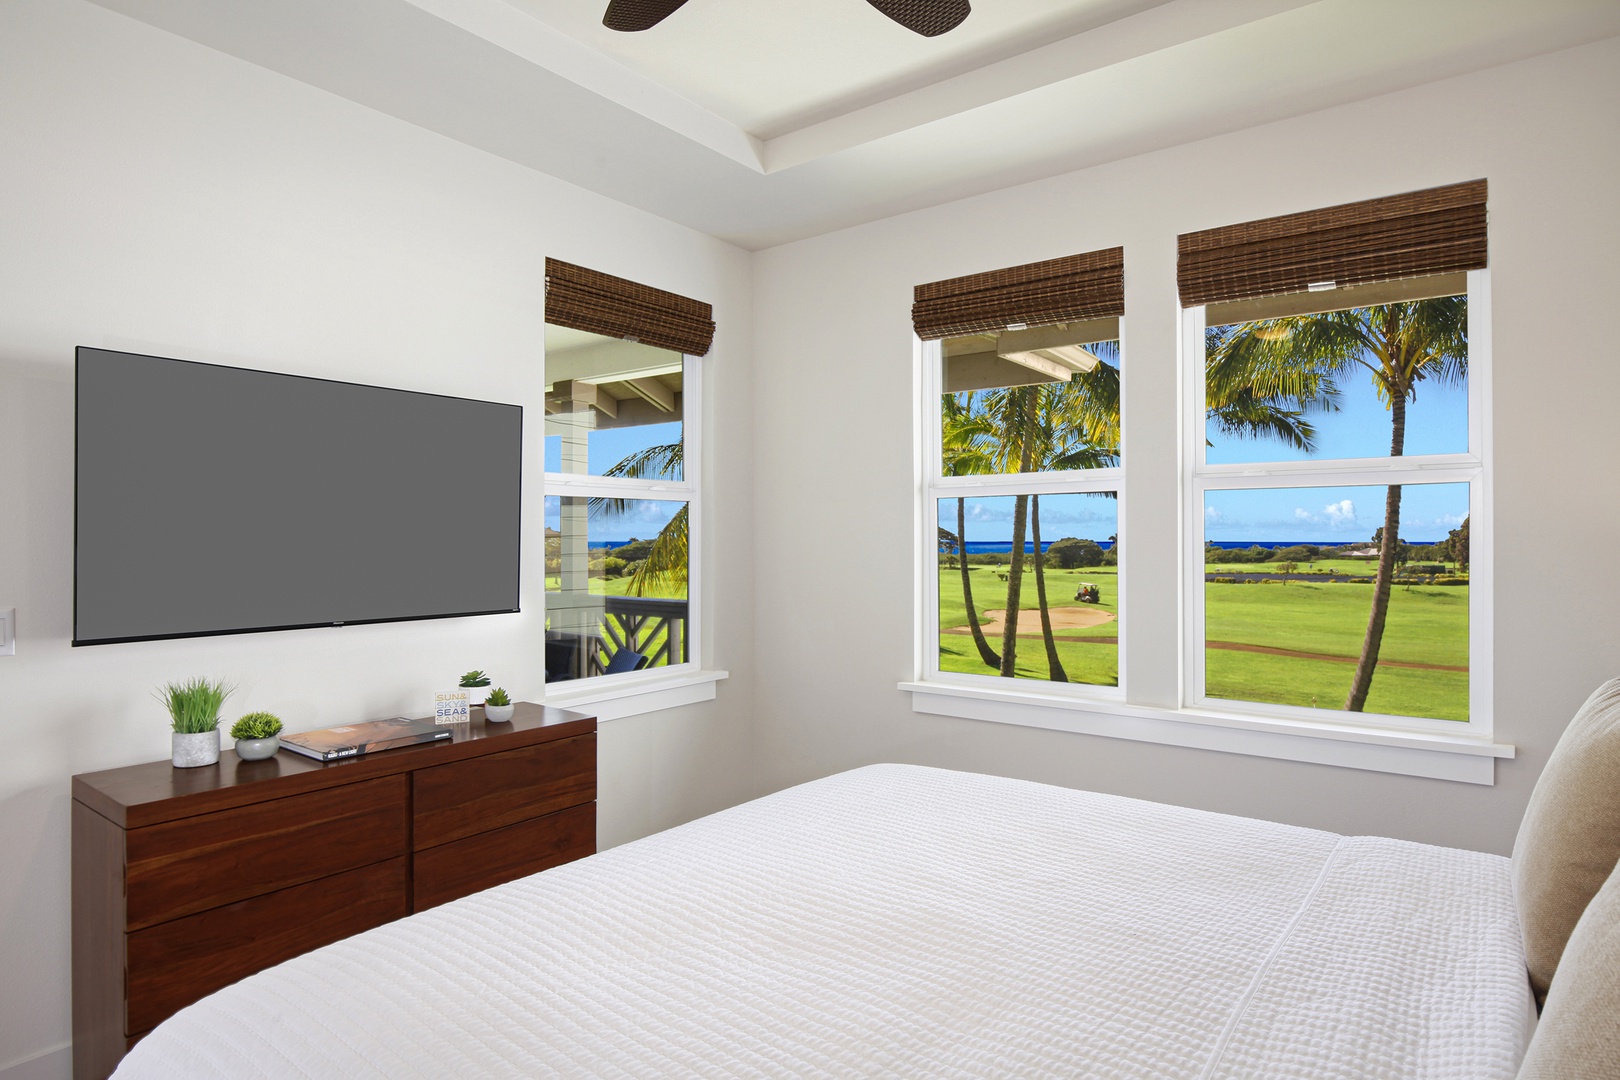 Koloa Vacation Rentals, Pili Mai 8C - Master bedroom with golf course and distant ocean view